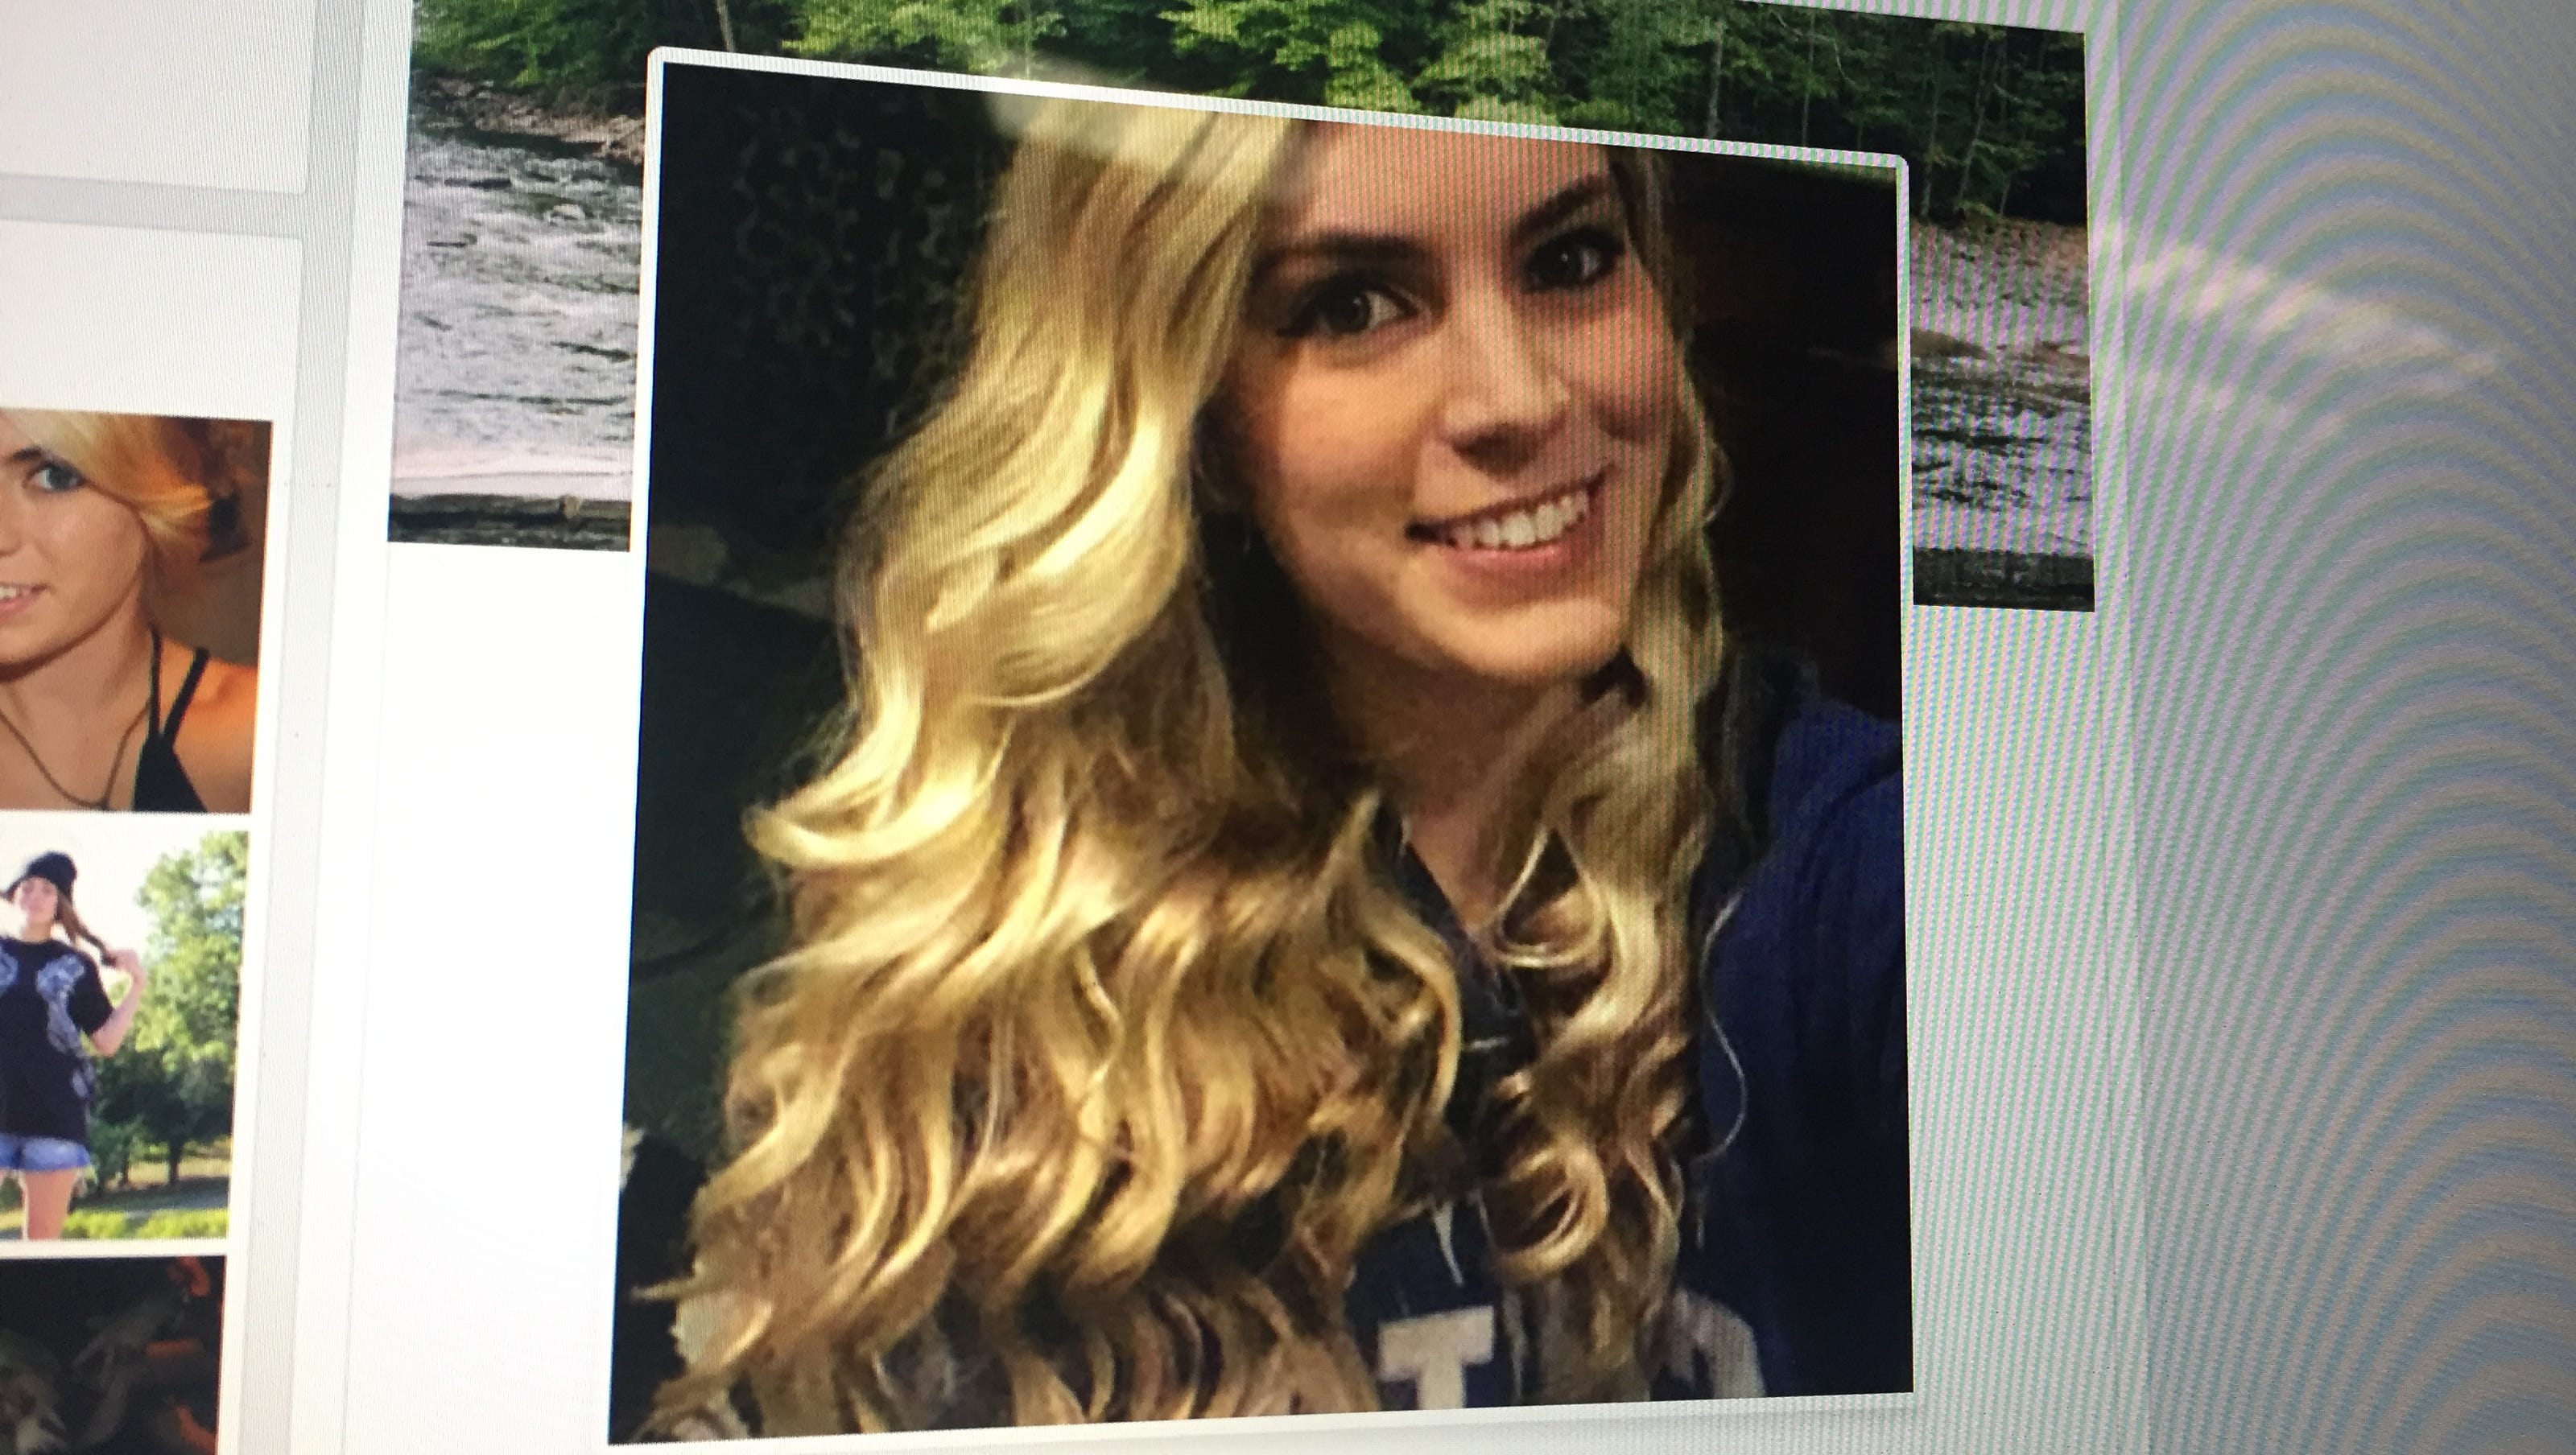 Binghamton University student Haley Anderson's death ruled a homicide